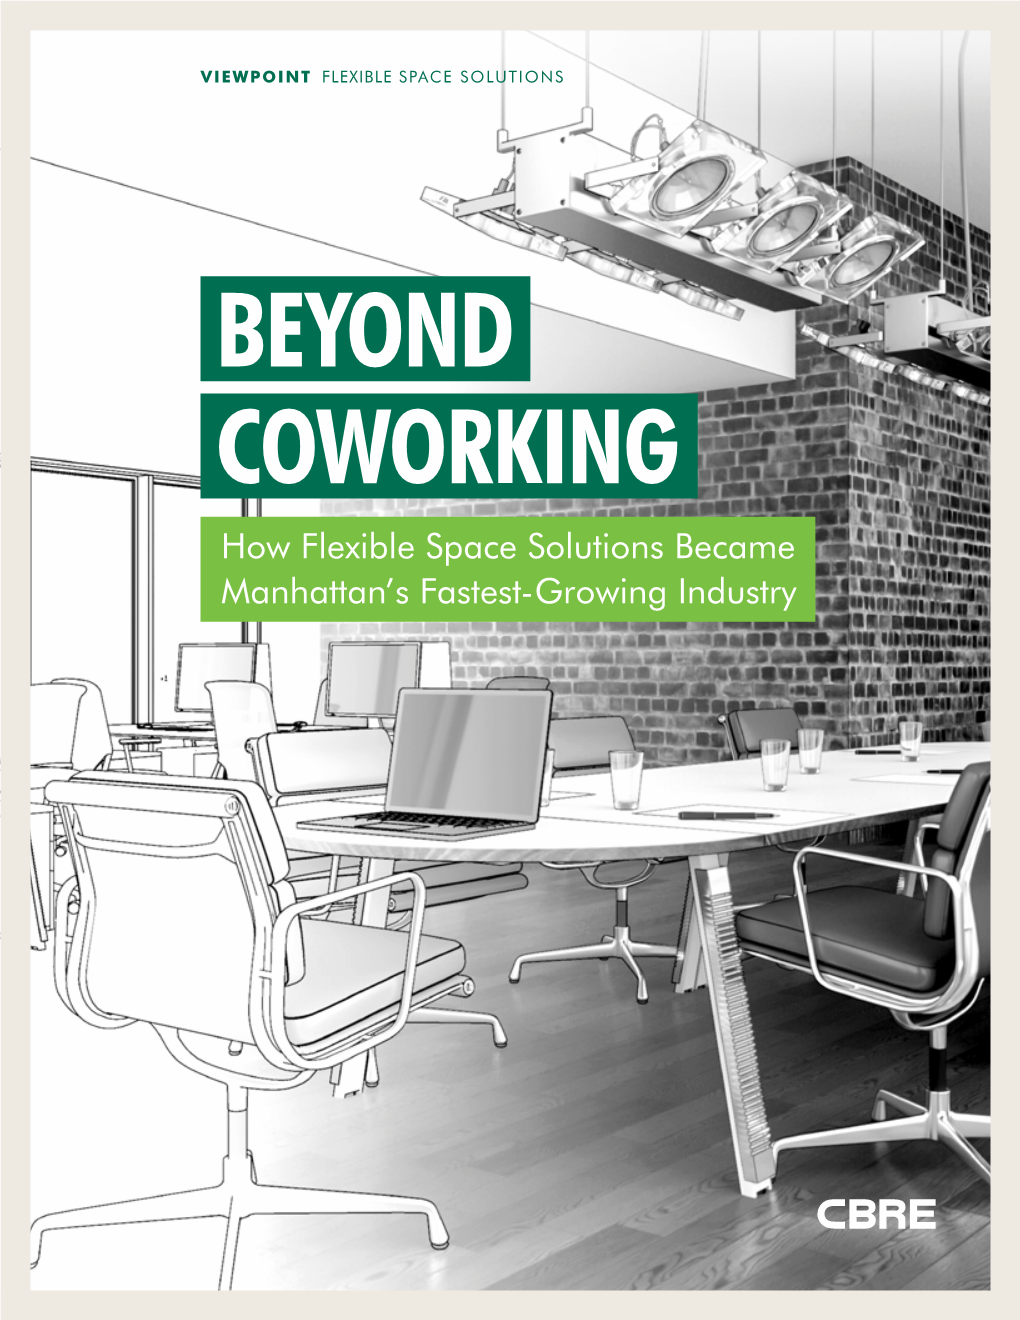 BEYOND COWORKING How Flexible Space Solutions Became Manhattan’S Fastest-Growing Industry VIEWPOINT FLEXIBLE SPACE SOLUTIONS